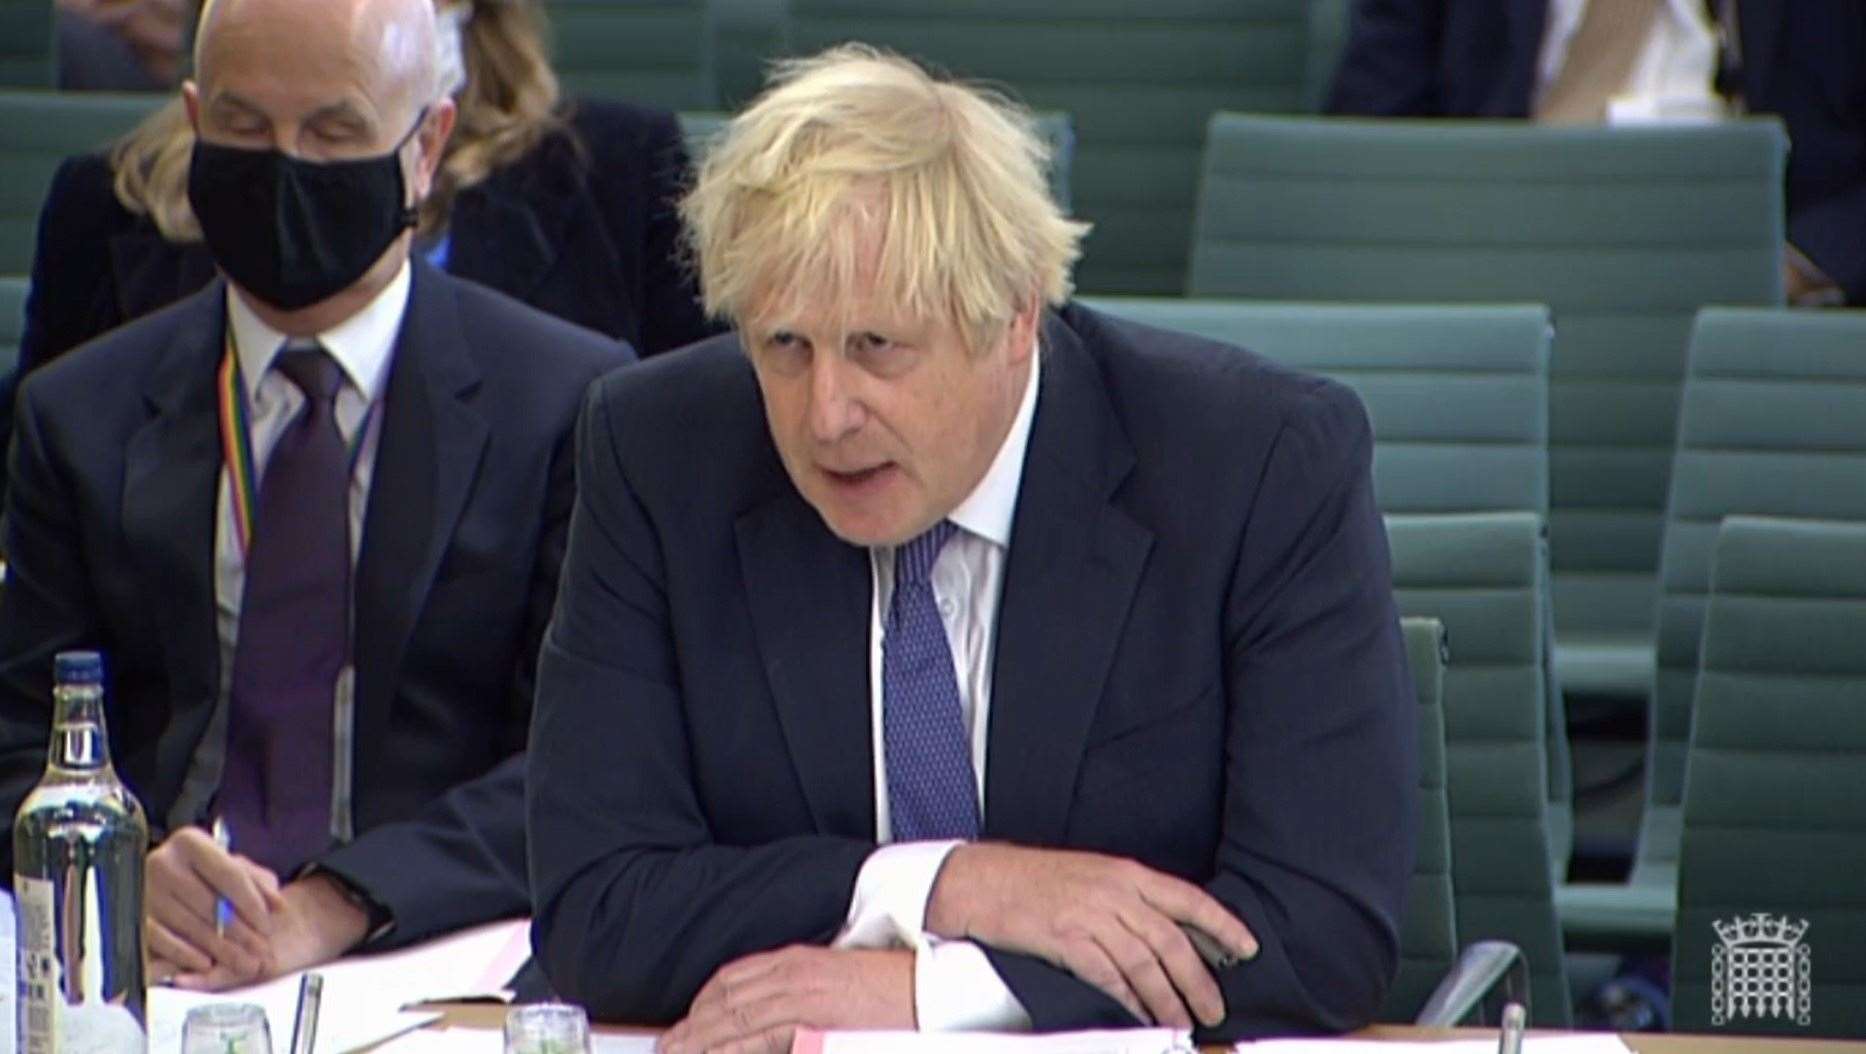 Prime Minister Boris Johnson giving evidence to the Liaison Committee at the House of Commons, London (House of Commons/PA)